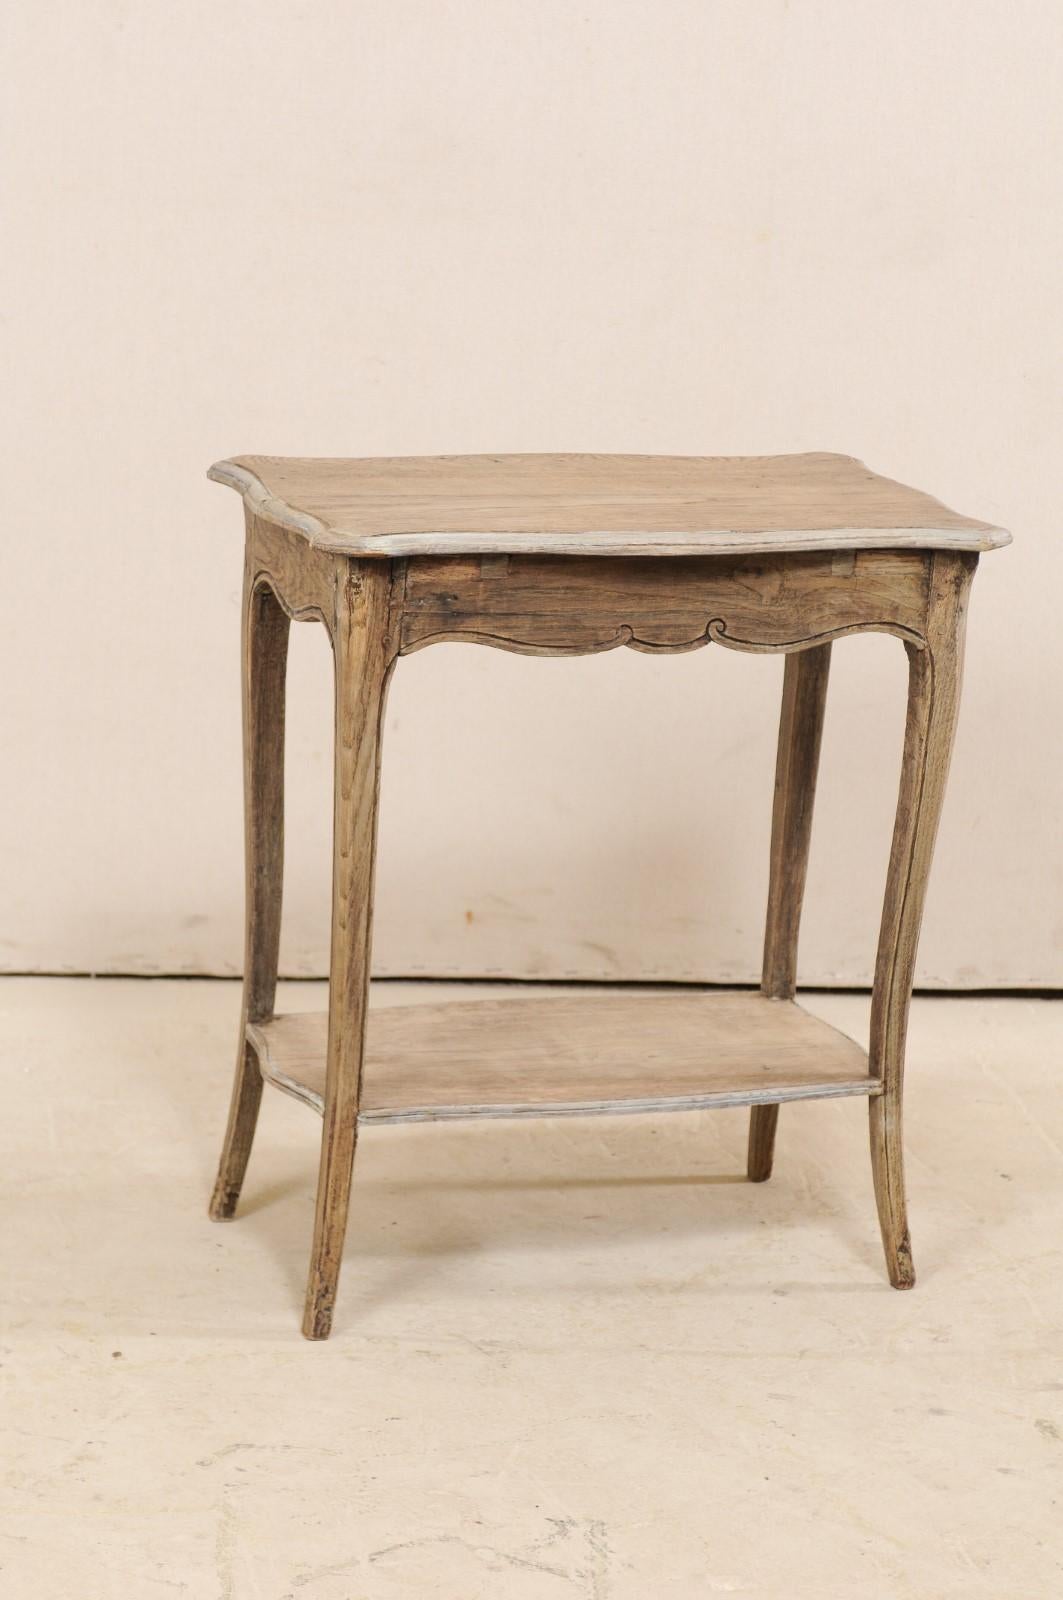 A French two-tiered end table from the 18th century. This antique table from France was created with delicate features; the rectangular-shaped top is edged with scalloped carving, which is then repeated about all sides of the apron beneath. The top